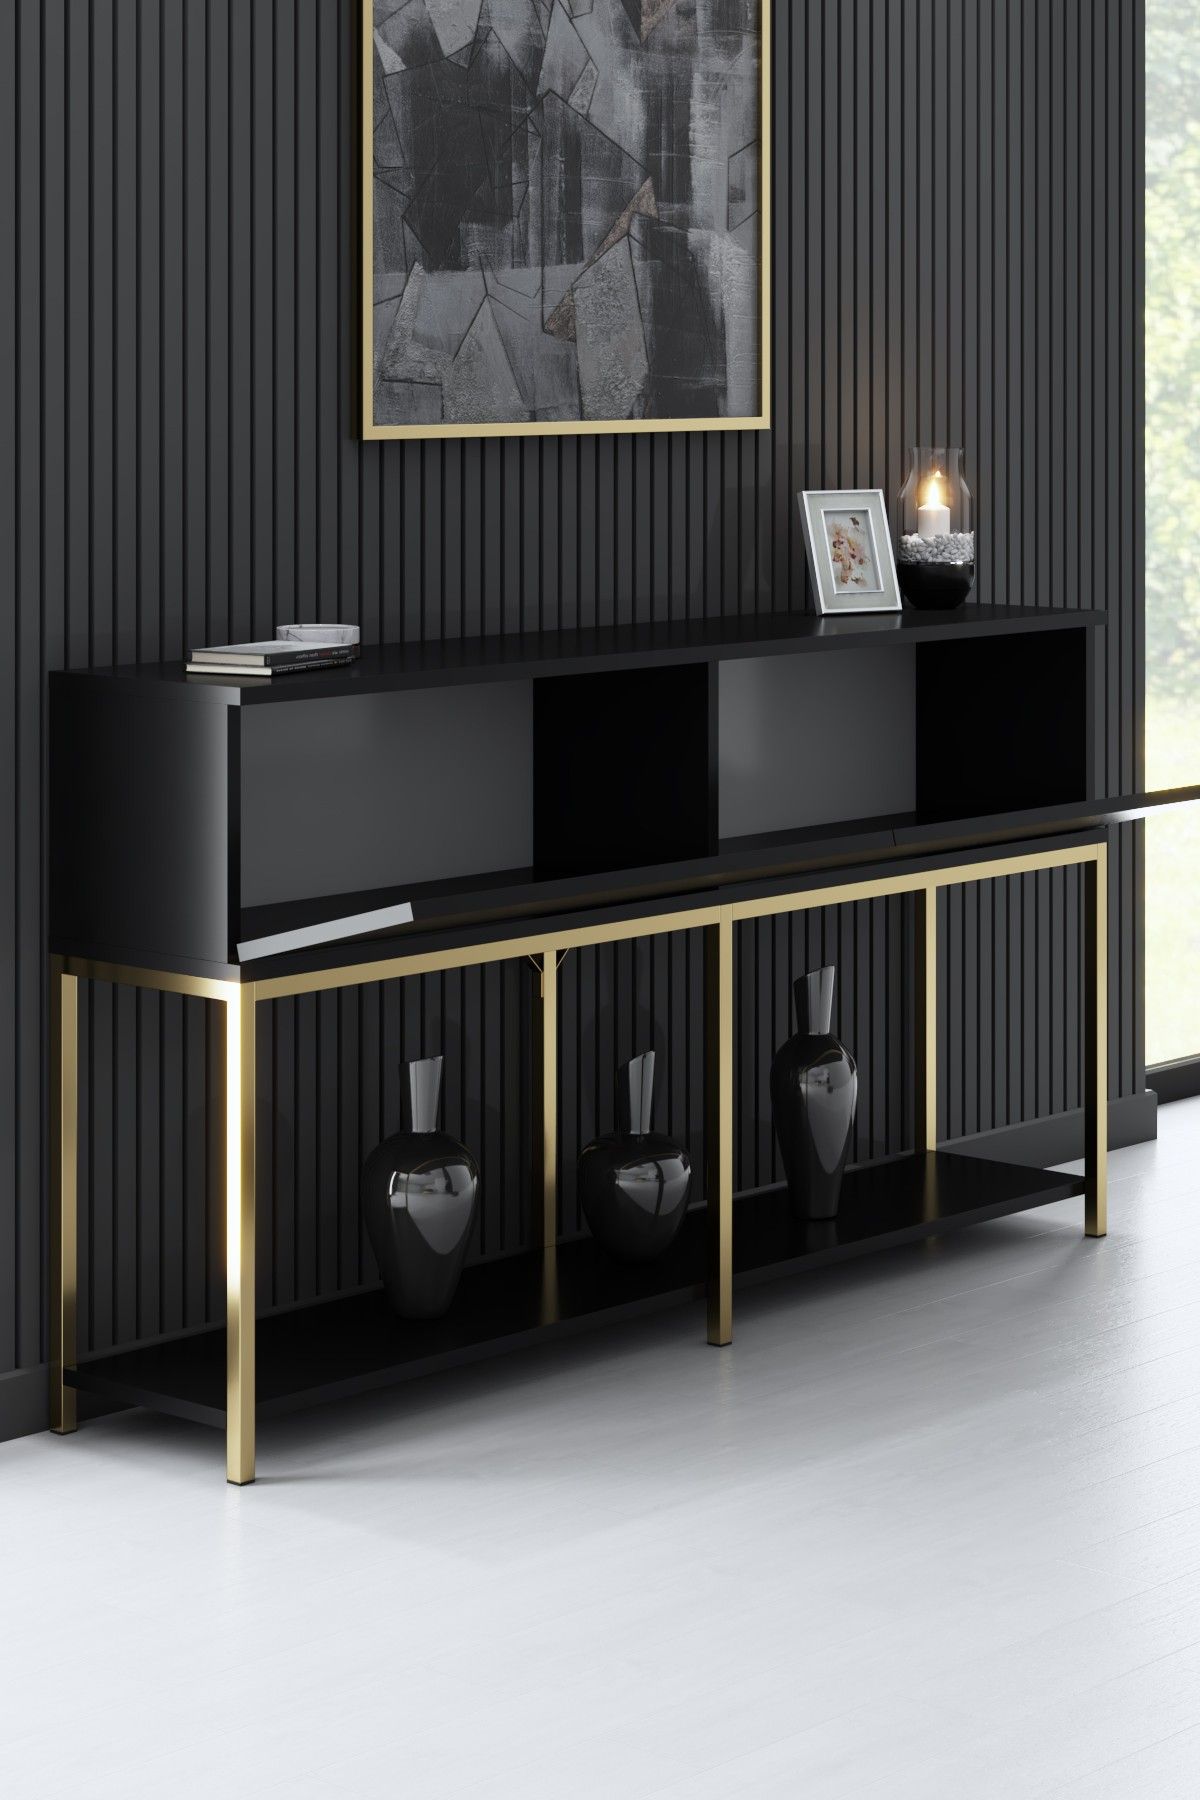 Lord - Black, Gold - Console